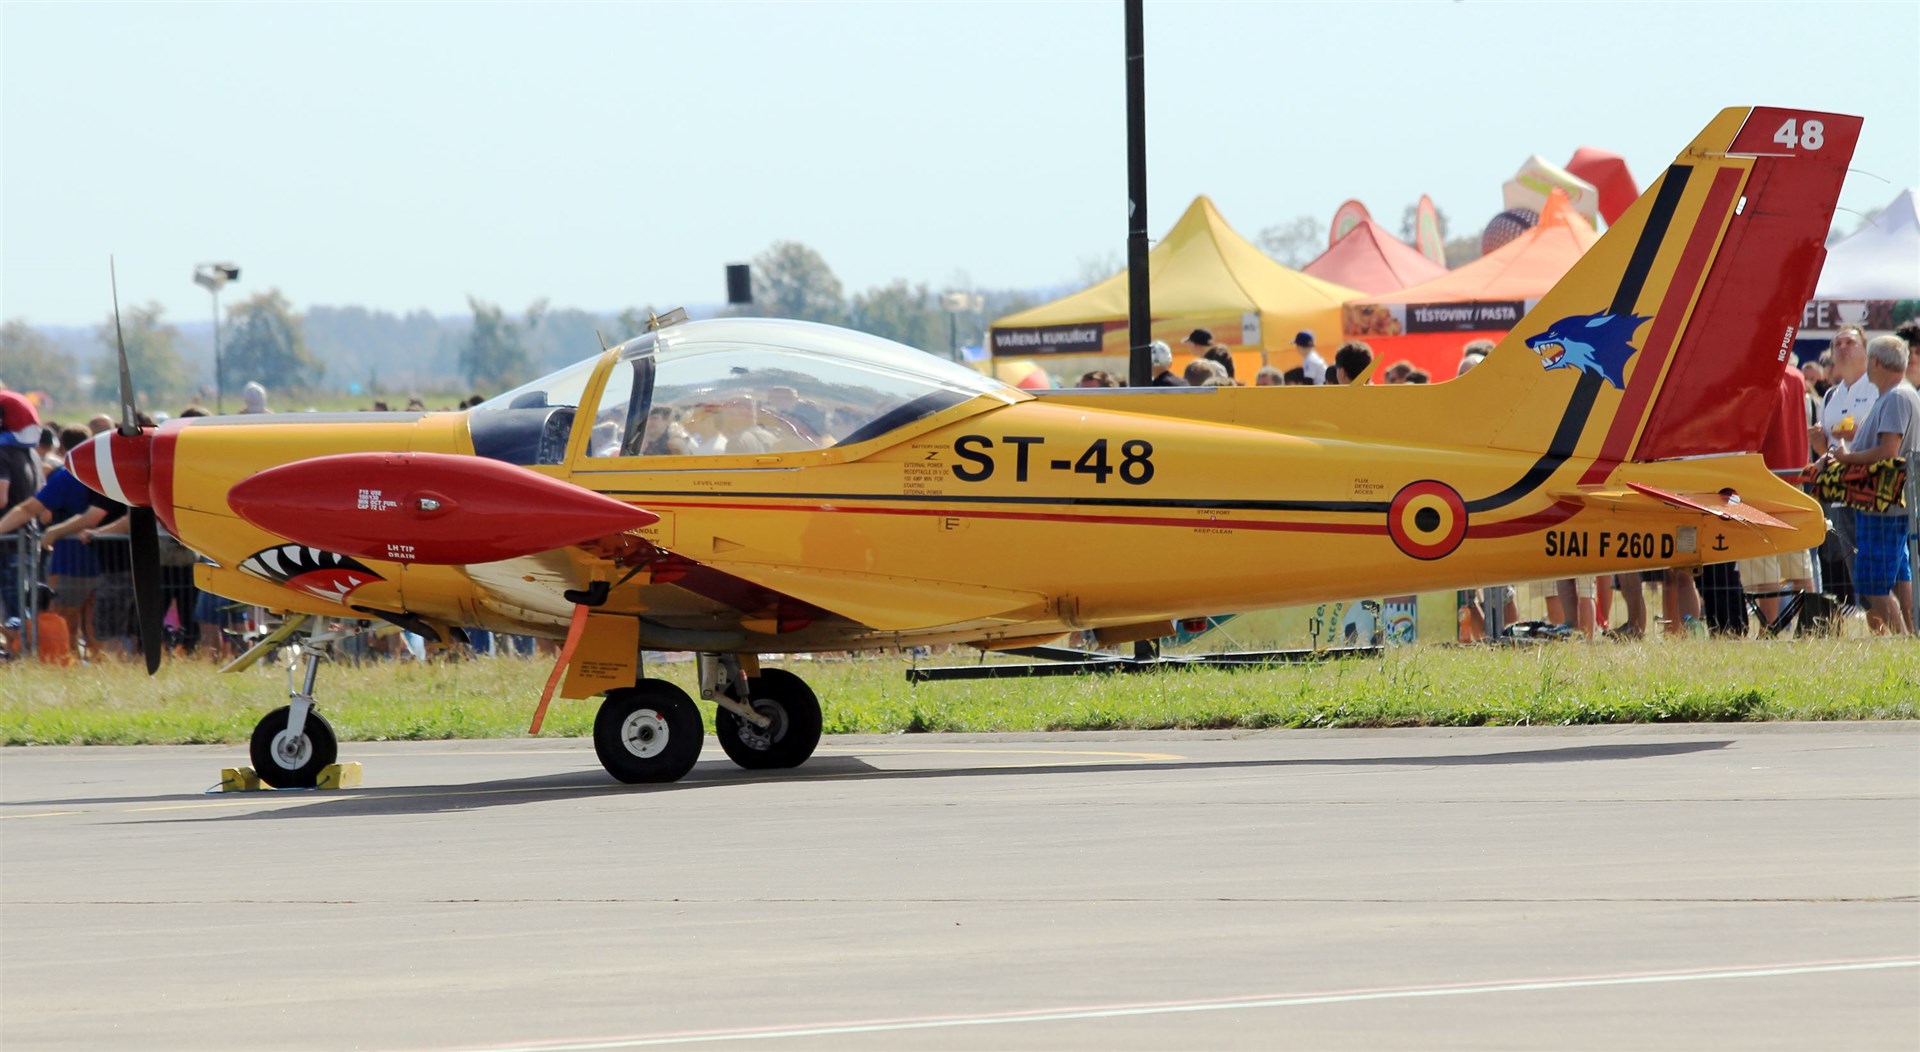 The aircraft whcih carried out the flight was a Siai-Marchetti F 260-D, the same aircraft type as the one in this file photo. Picture: Karelj, CC BY-SA 3.0 <https://creativecommons.org/licenses/by-sa/3.0>, via Wikimedia Commons.